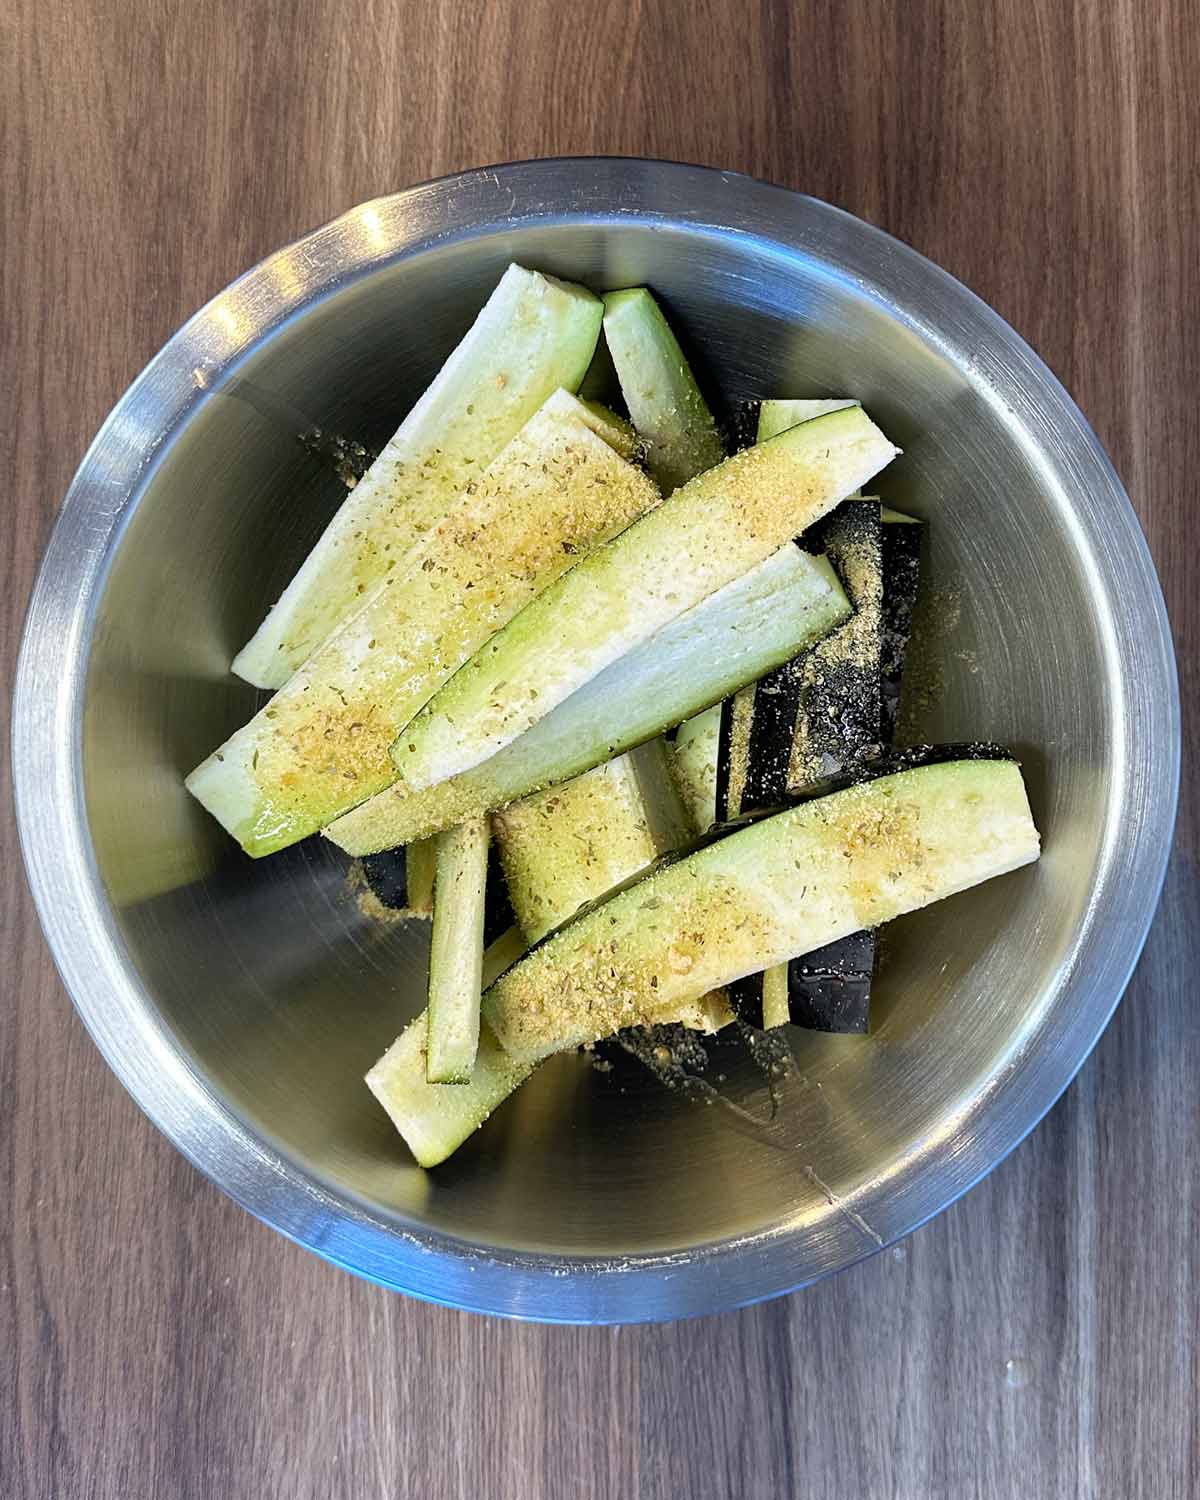 Aubergine strips in a bowl with oil and seasoning.